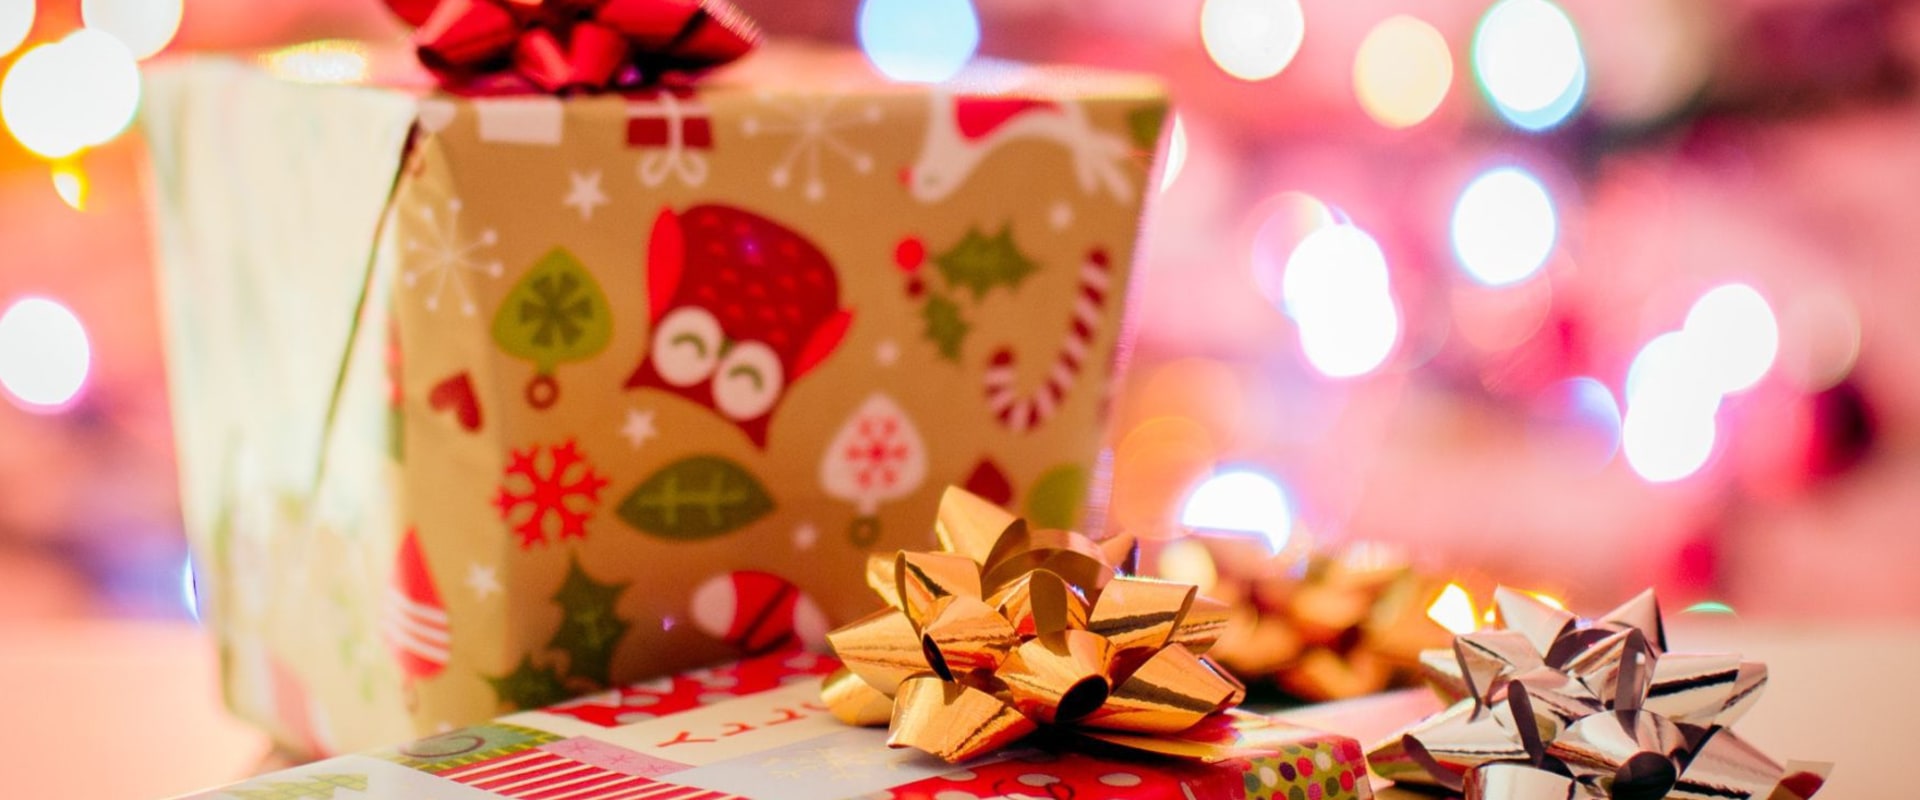 What are the christmas gift rules?